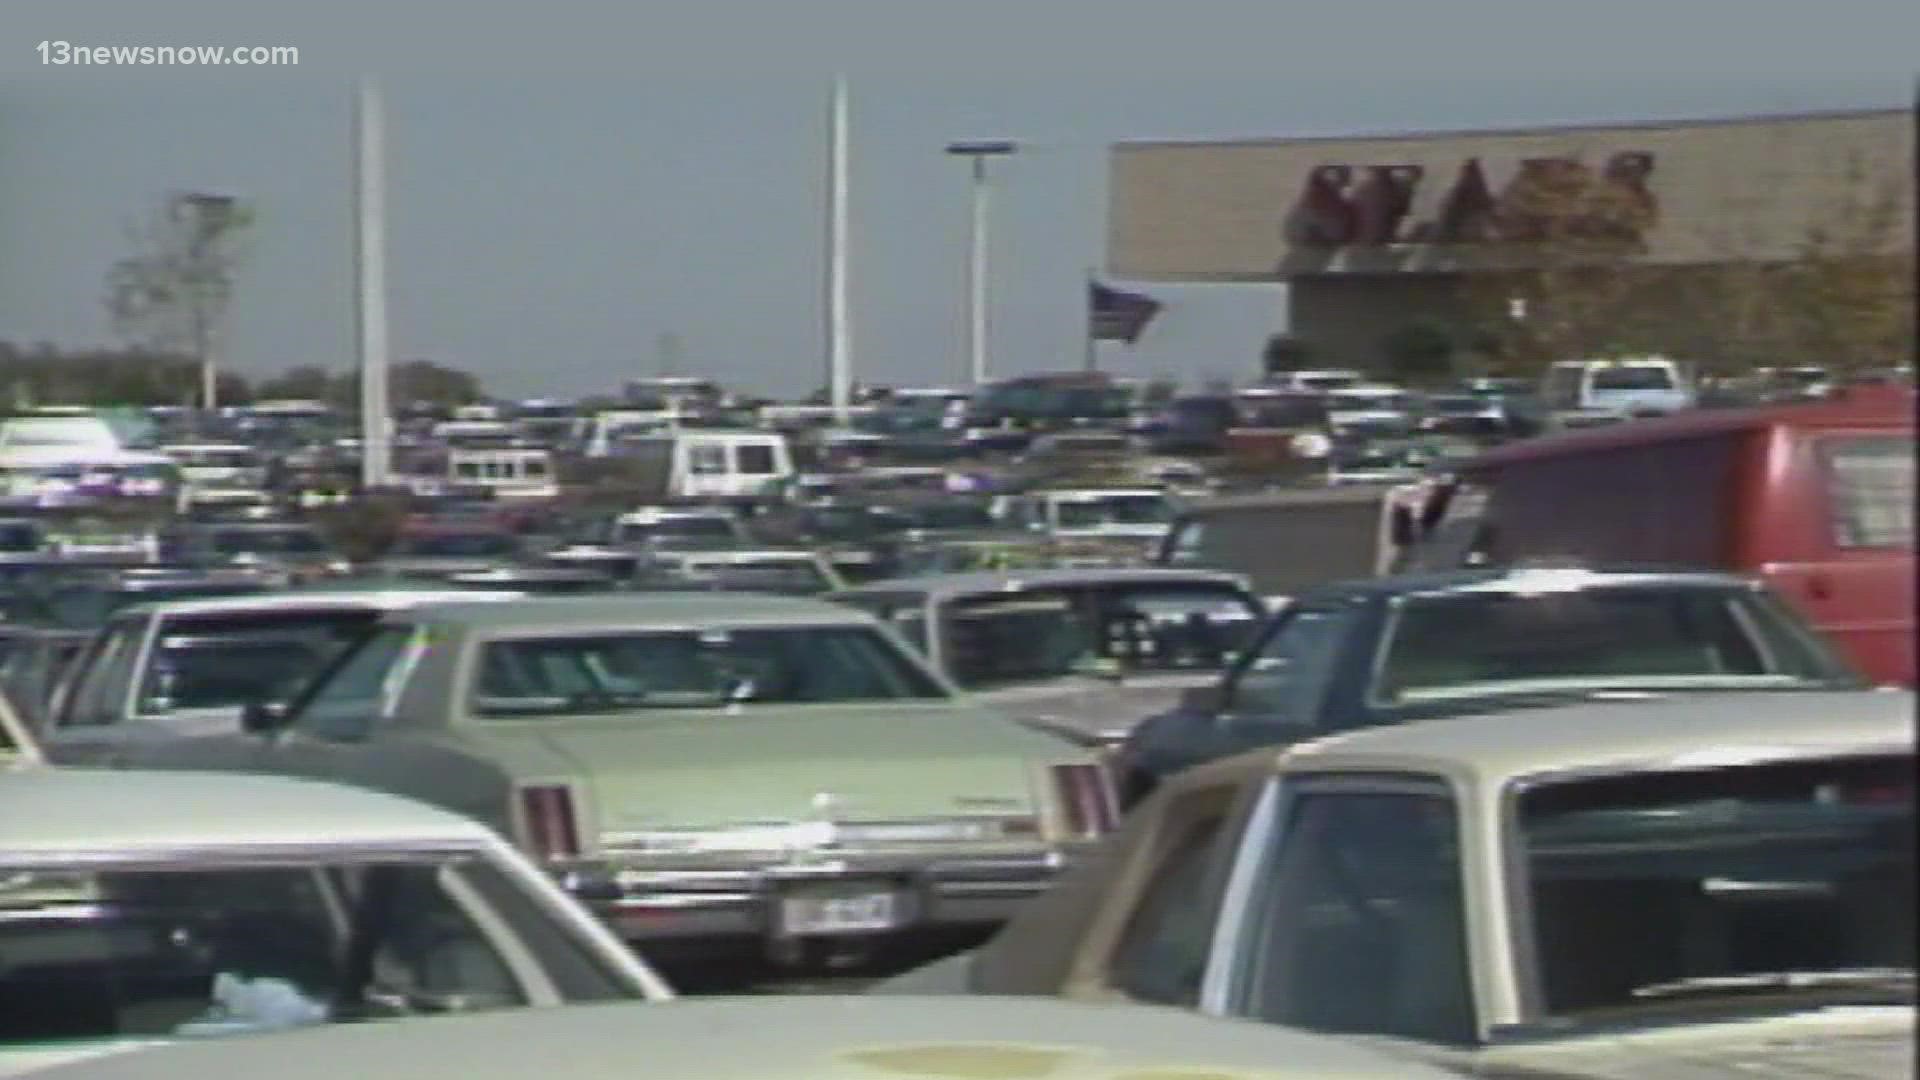 October 7 marks the 40th anniversary of Greenbrier Mall in Chesapeake, so Philip Townsend takes us back to Opening Day, back in 1981.